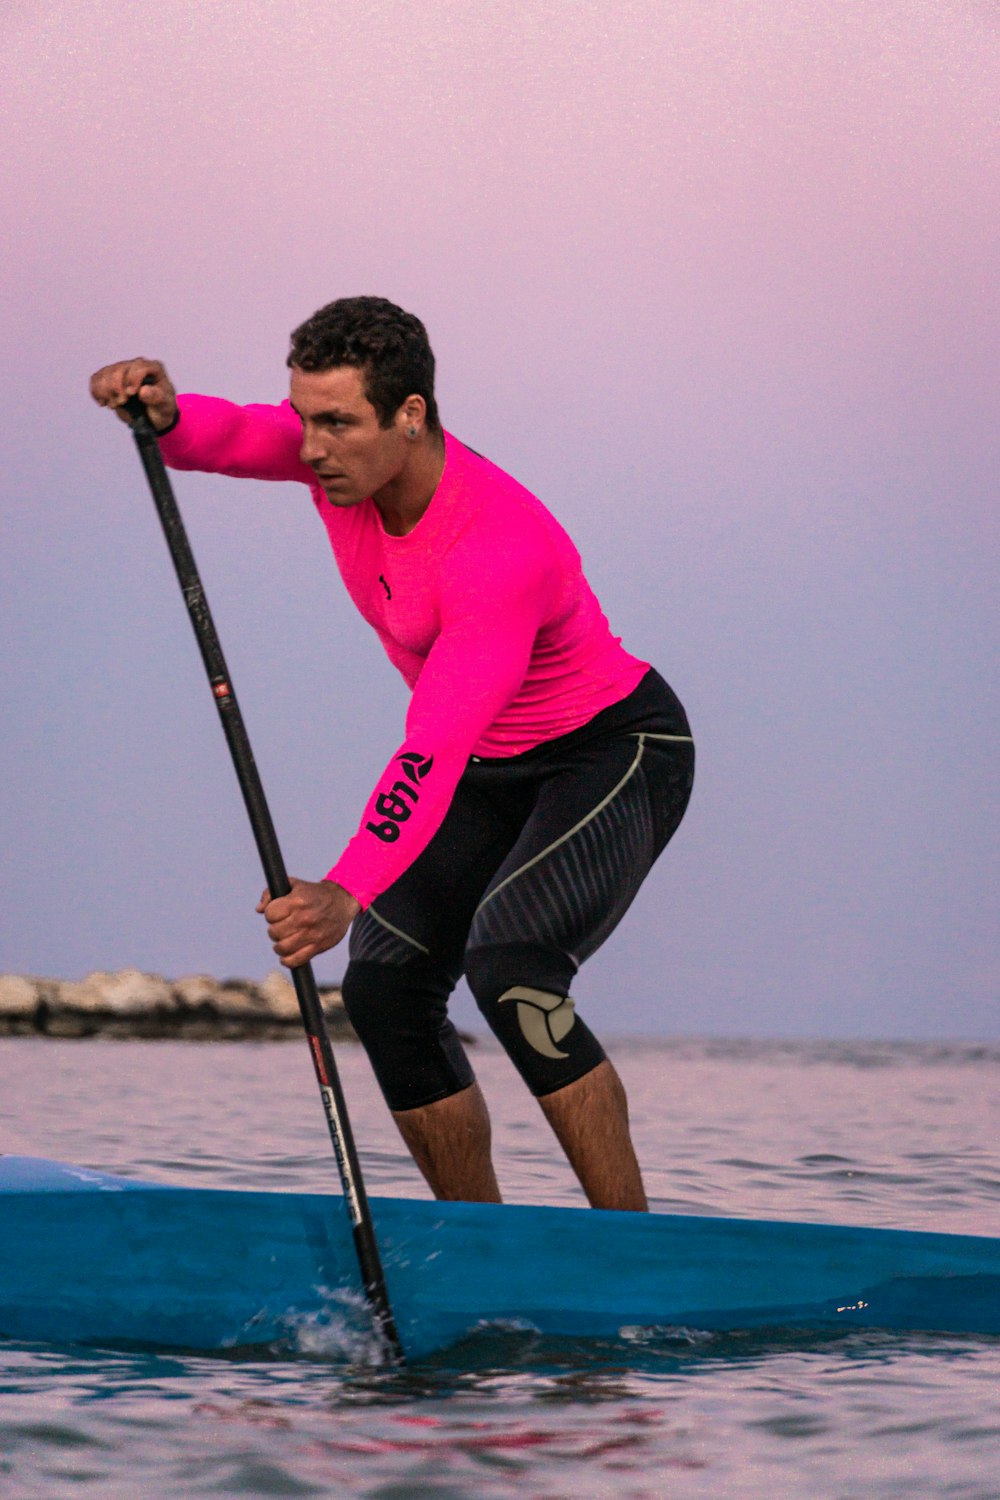 a man in a pink shirt is on a surfboard